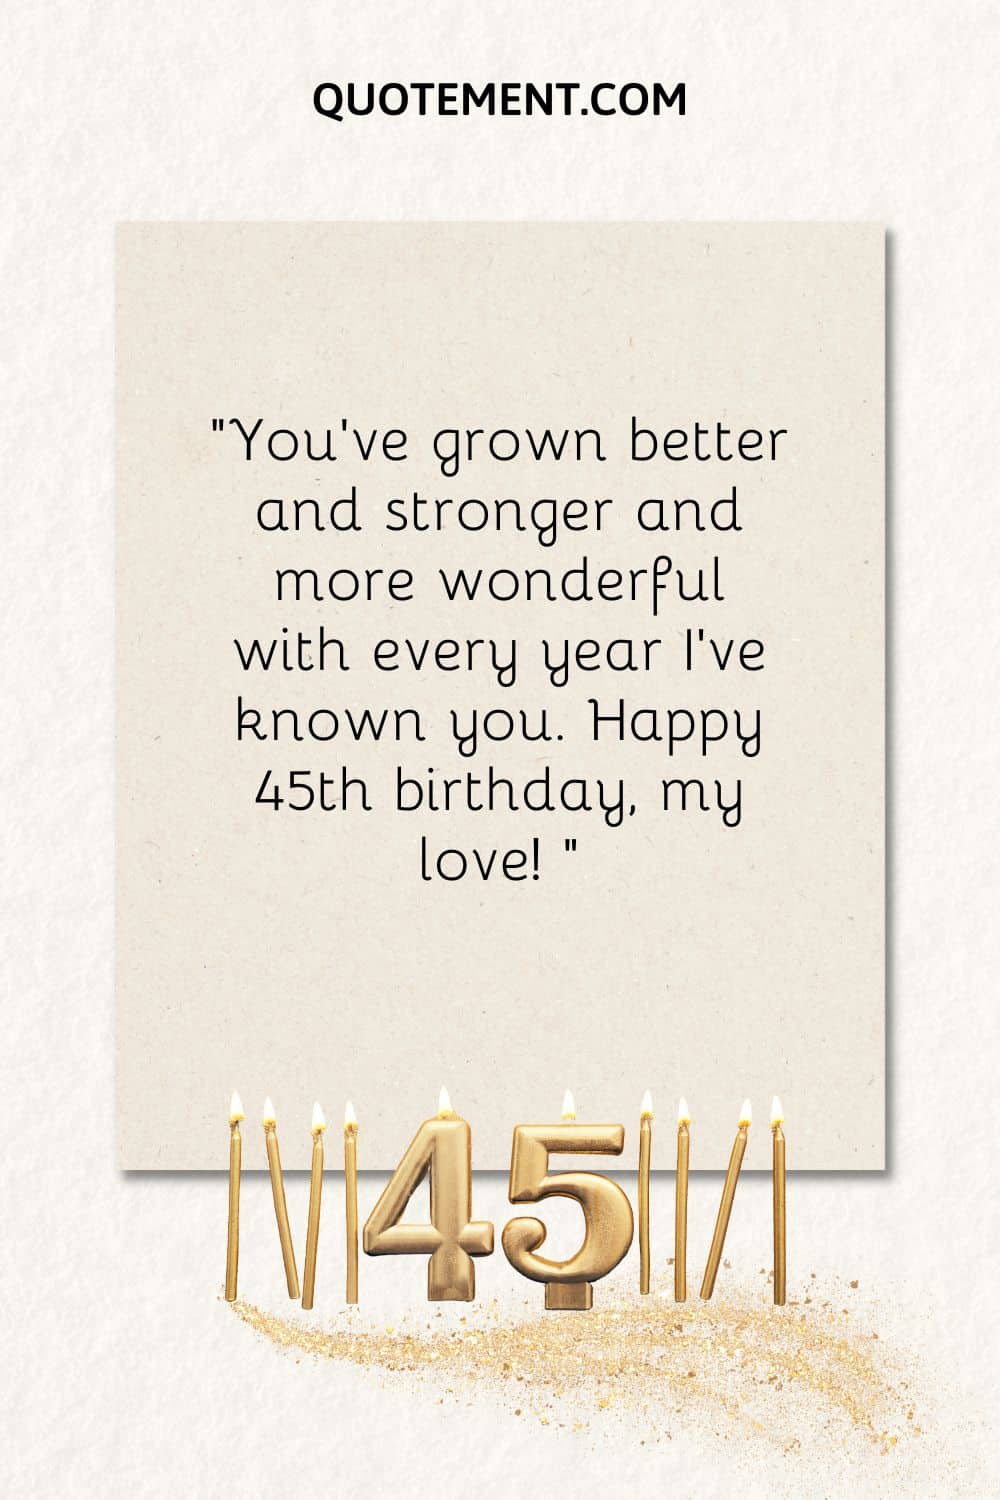 “You’ve grown better and stronger and more wonderful with every year I’ve known you. Happy 45th birthday, my love! “